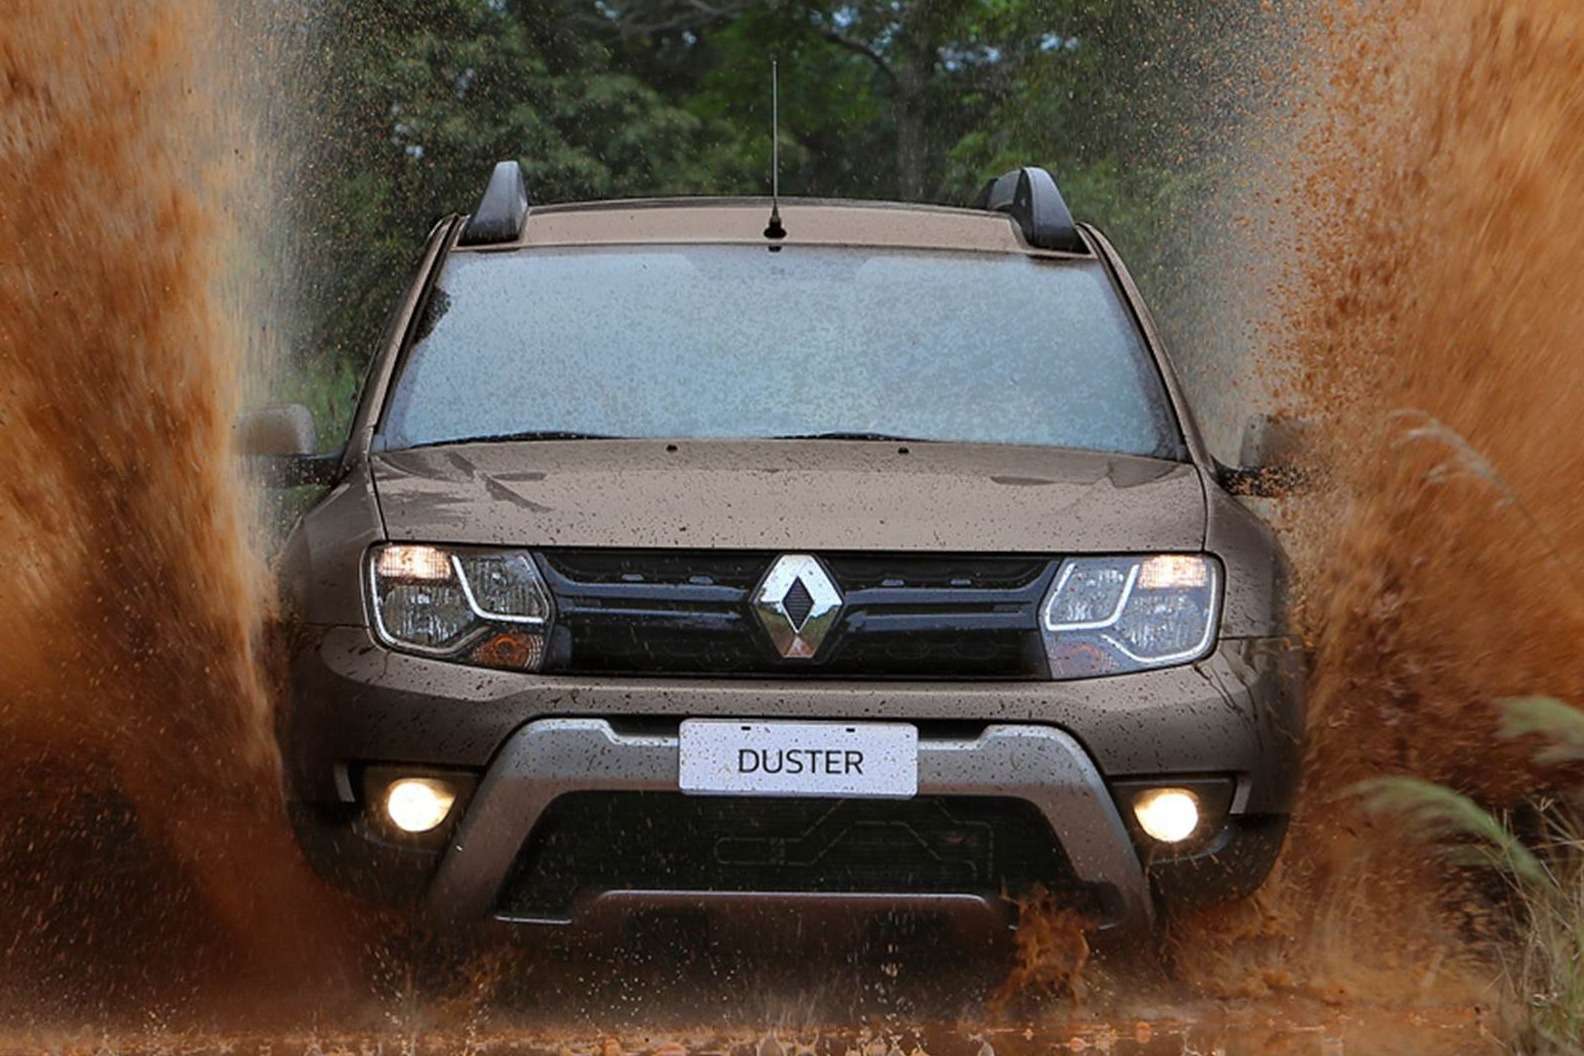 2016-renault-duster-launched-with-new-look-better-economy-in-brazil-photo-gallery_2